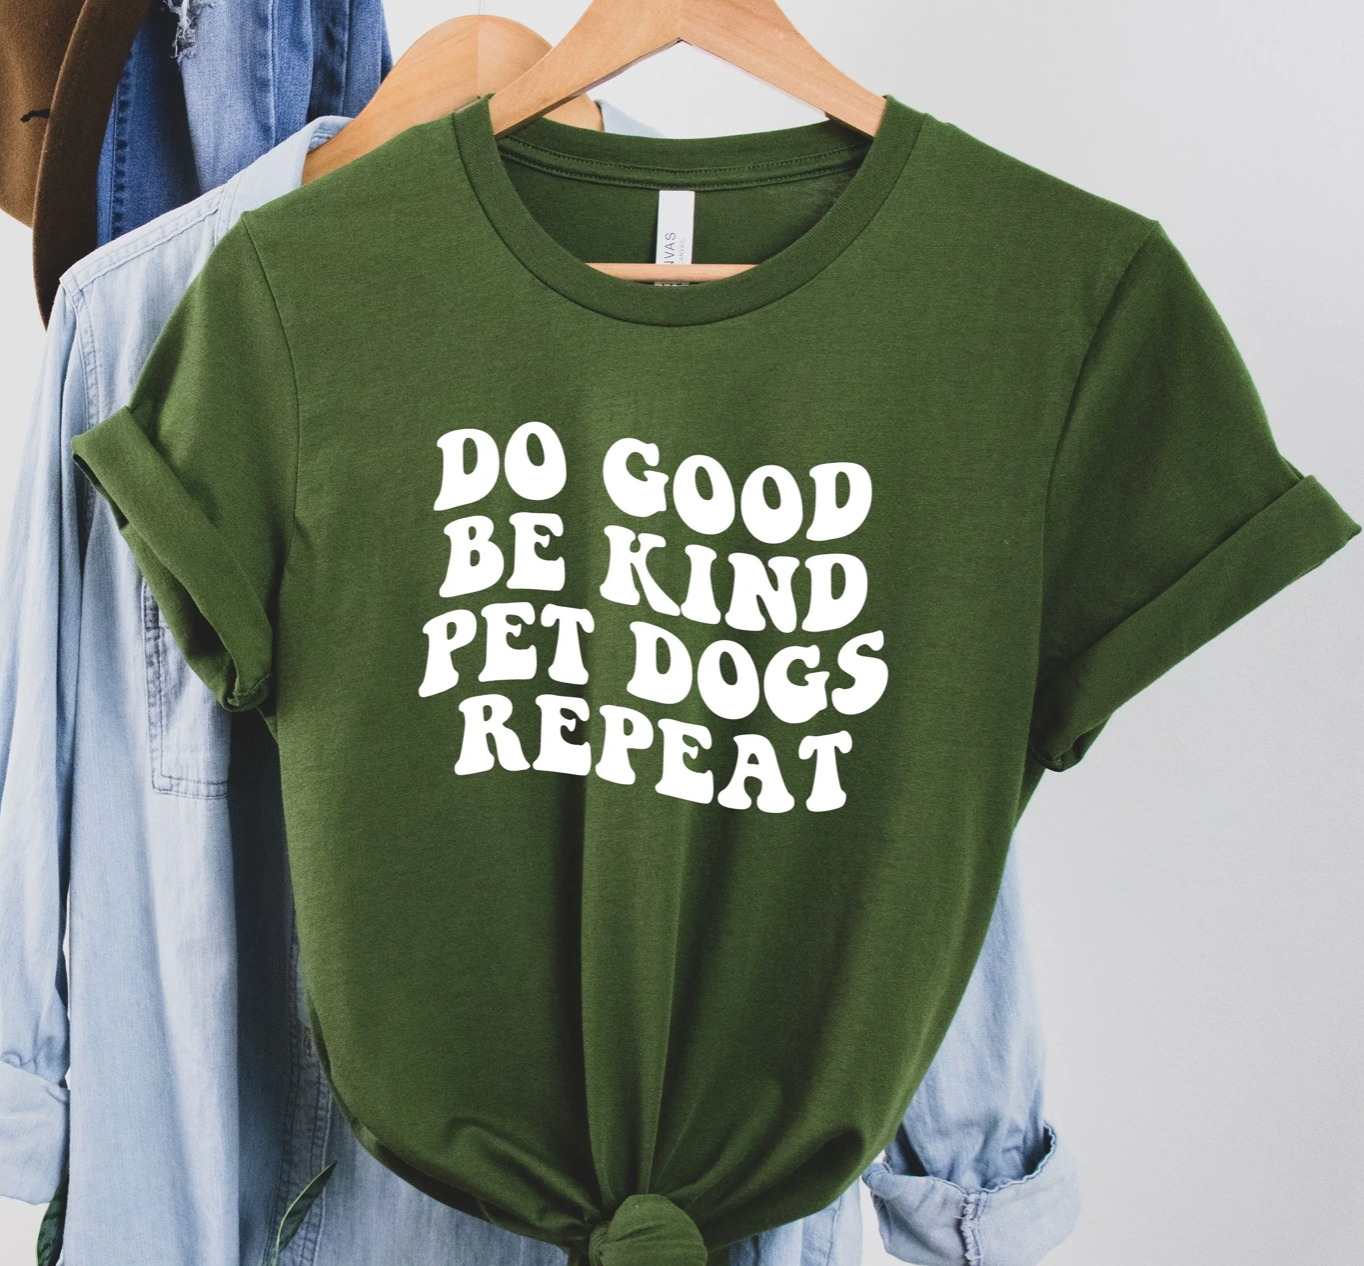 Do Good, Be Kind, Pet Dogs, Repeat Shirt